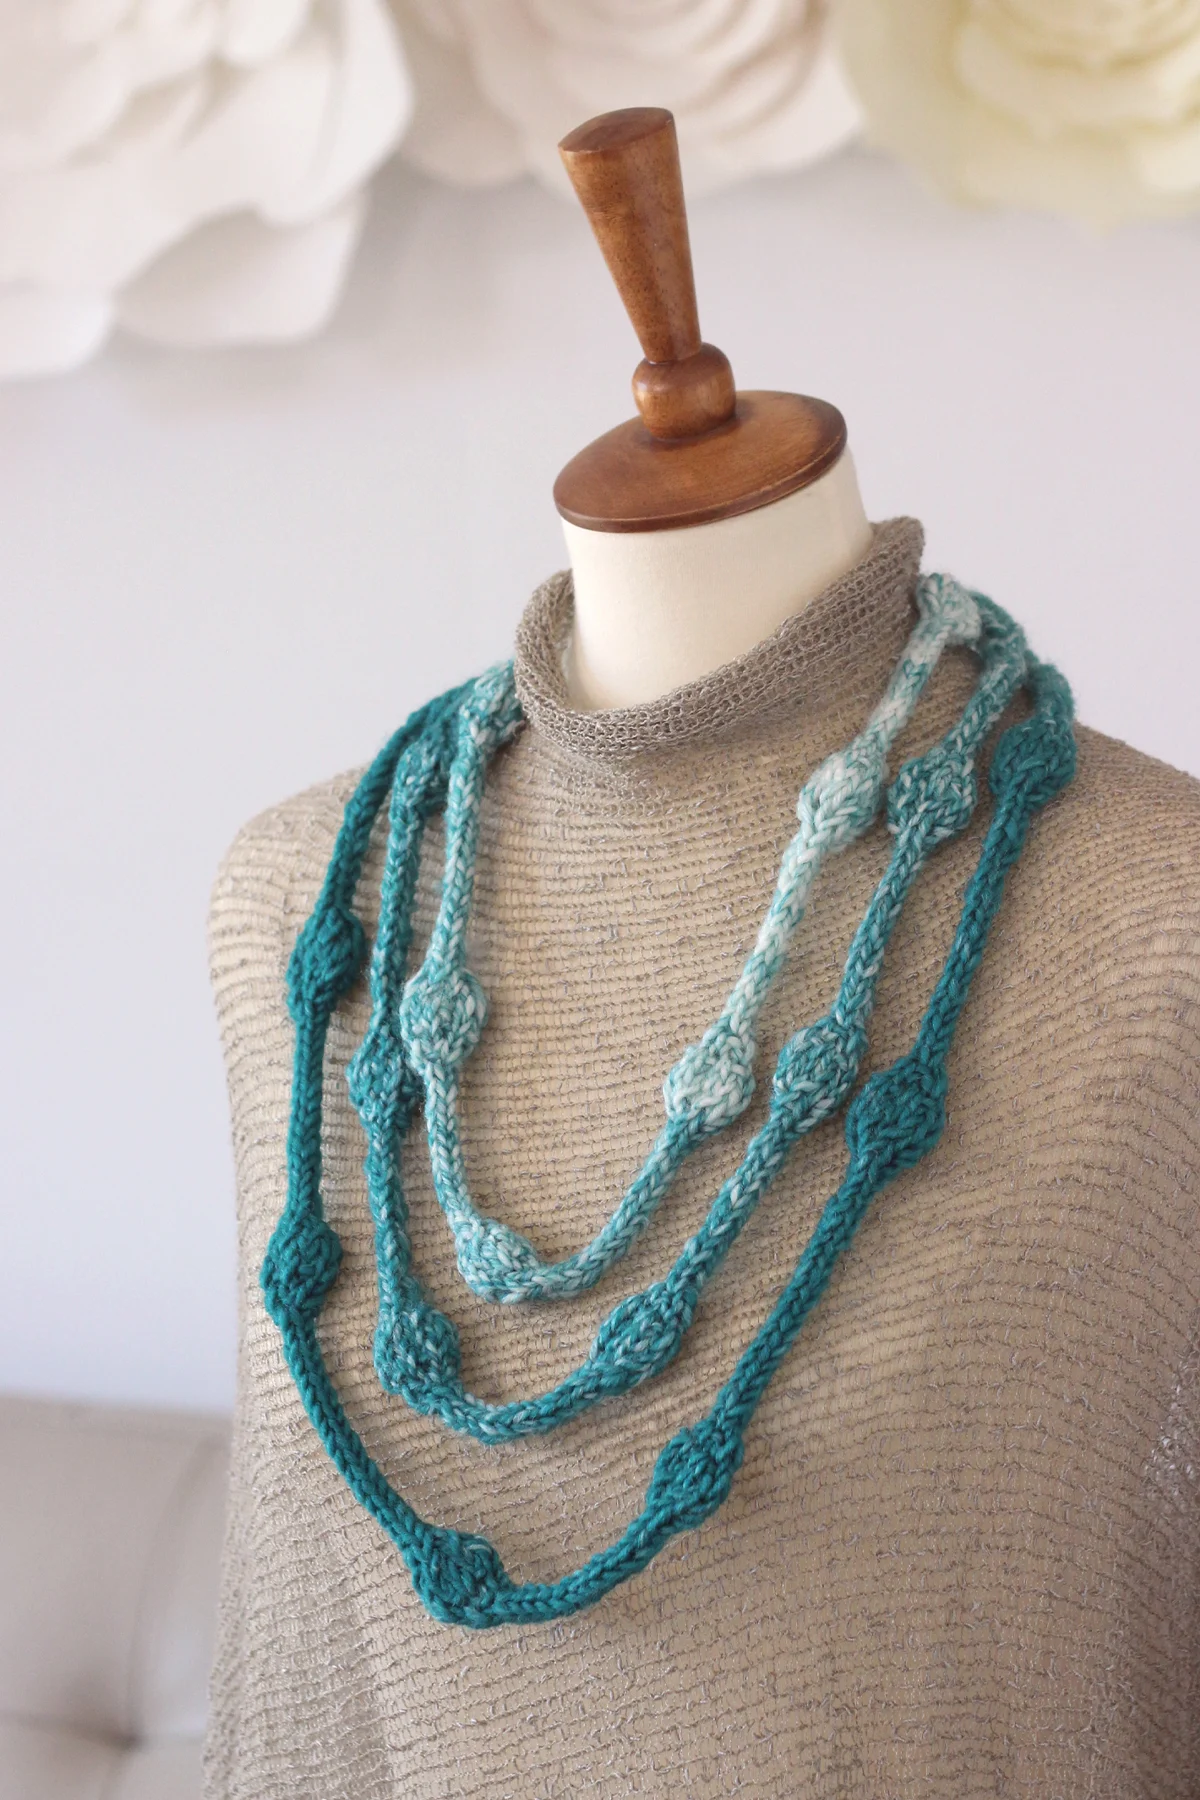 Knitted Necklace with Beaded Texture in blue and white yarn colors displayed on a mannequin.